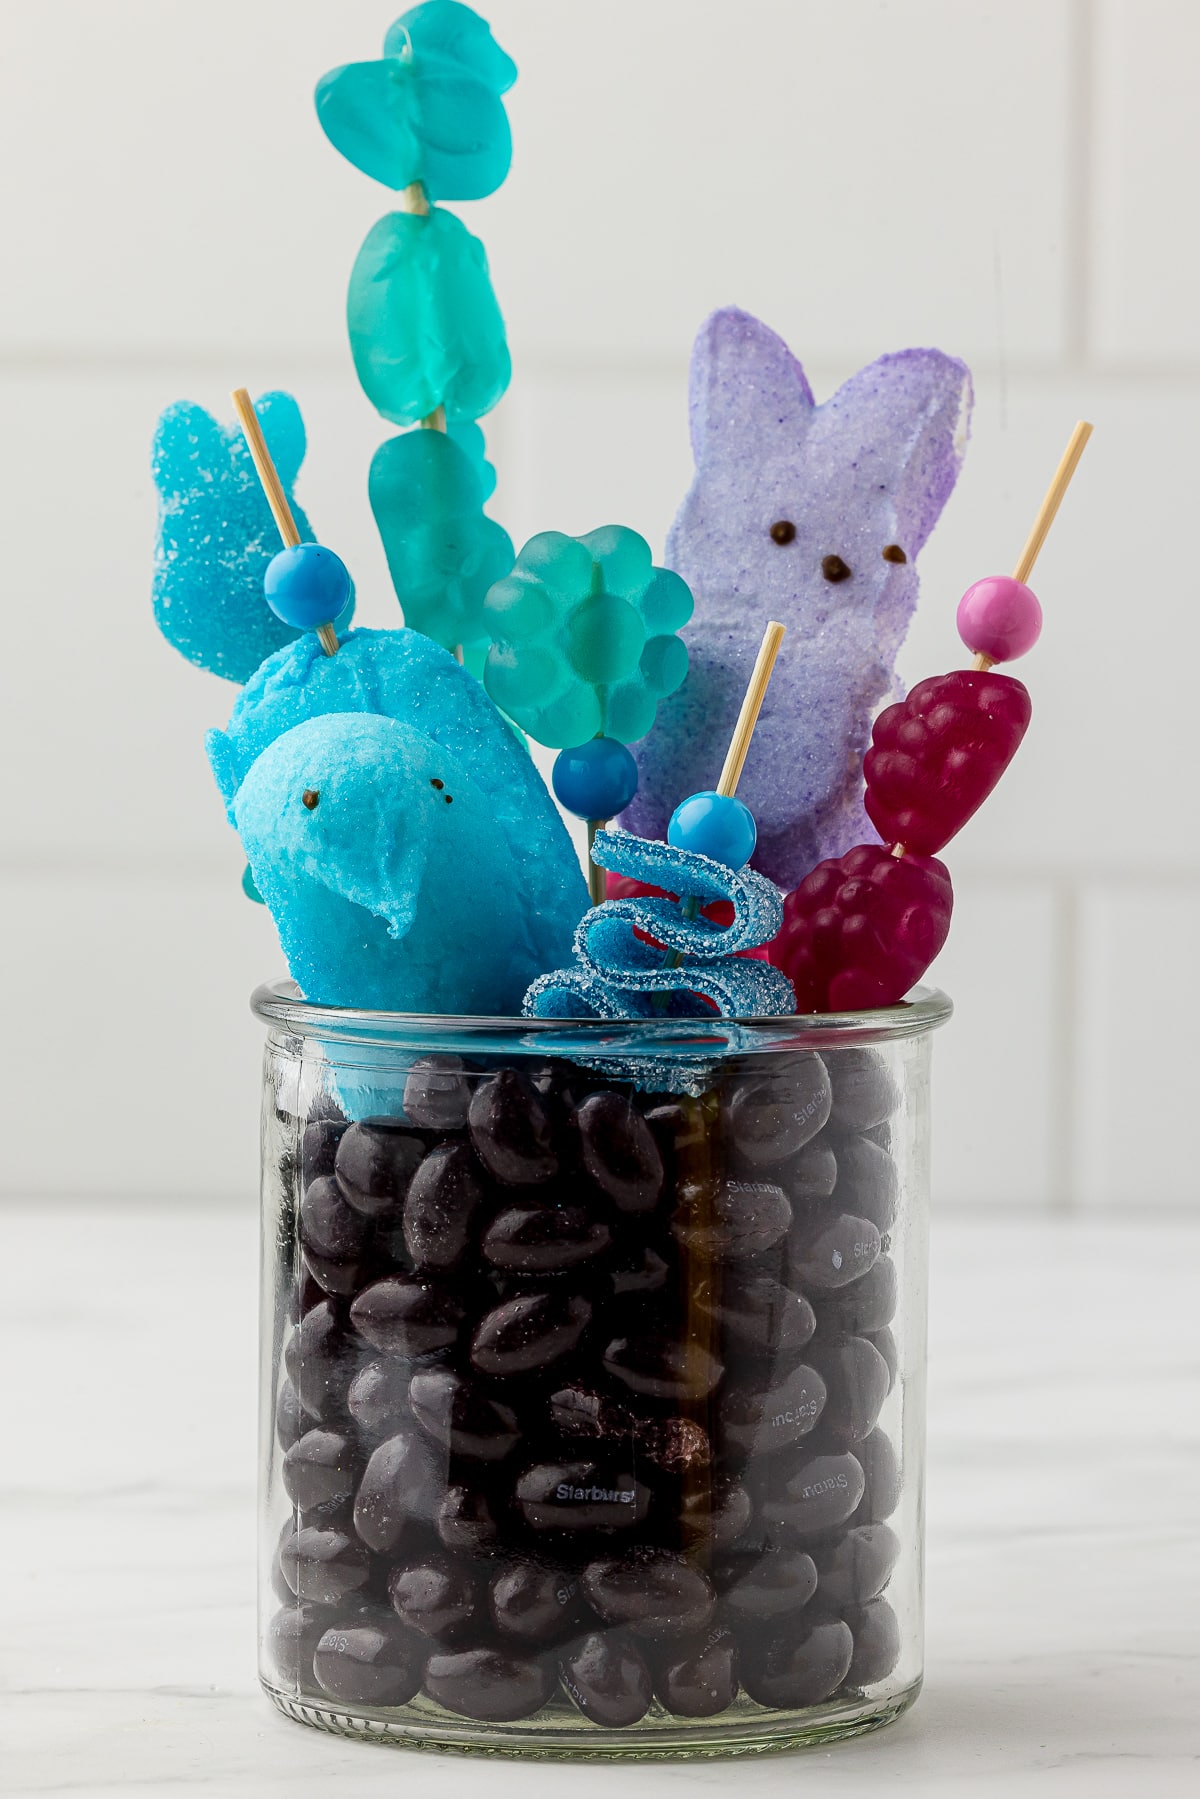 Purple jelly beans in a small jar with purple and blue candy kabobs made with blue gummy candy and purple candy bought at Five Below on a white countertop. Purple bunny peeps and blue chick peeps.